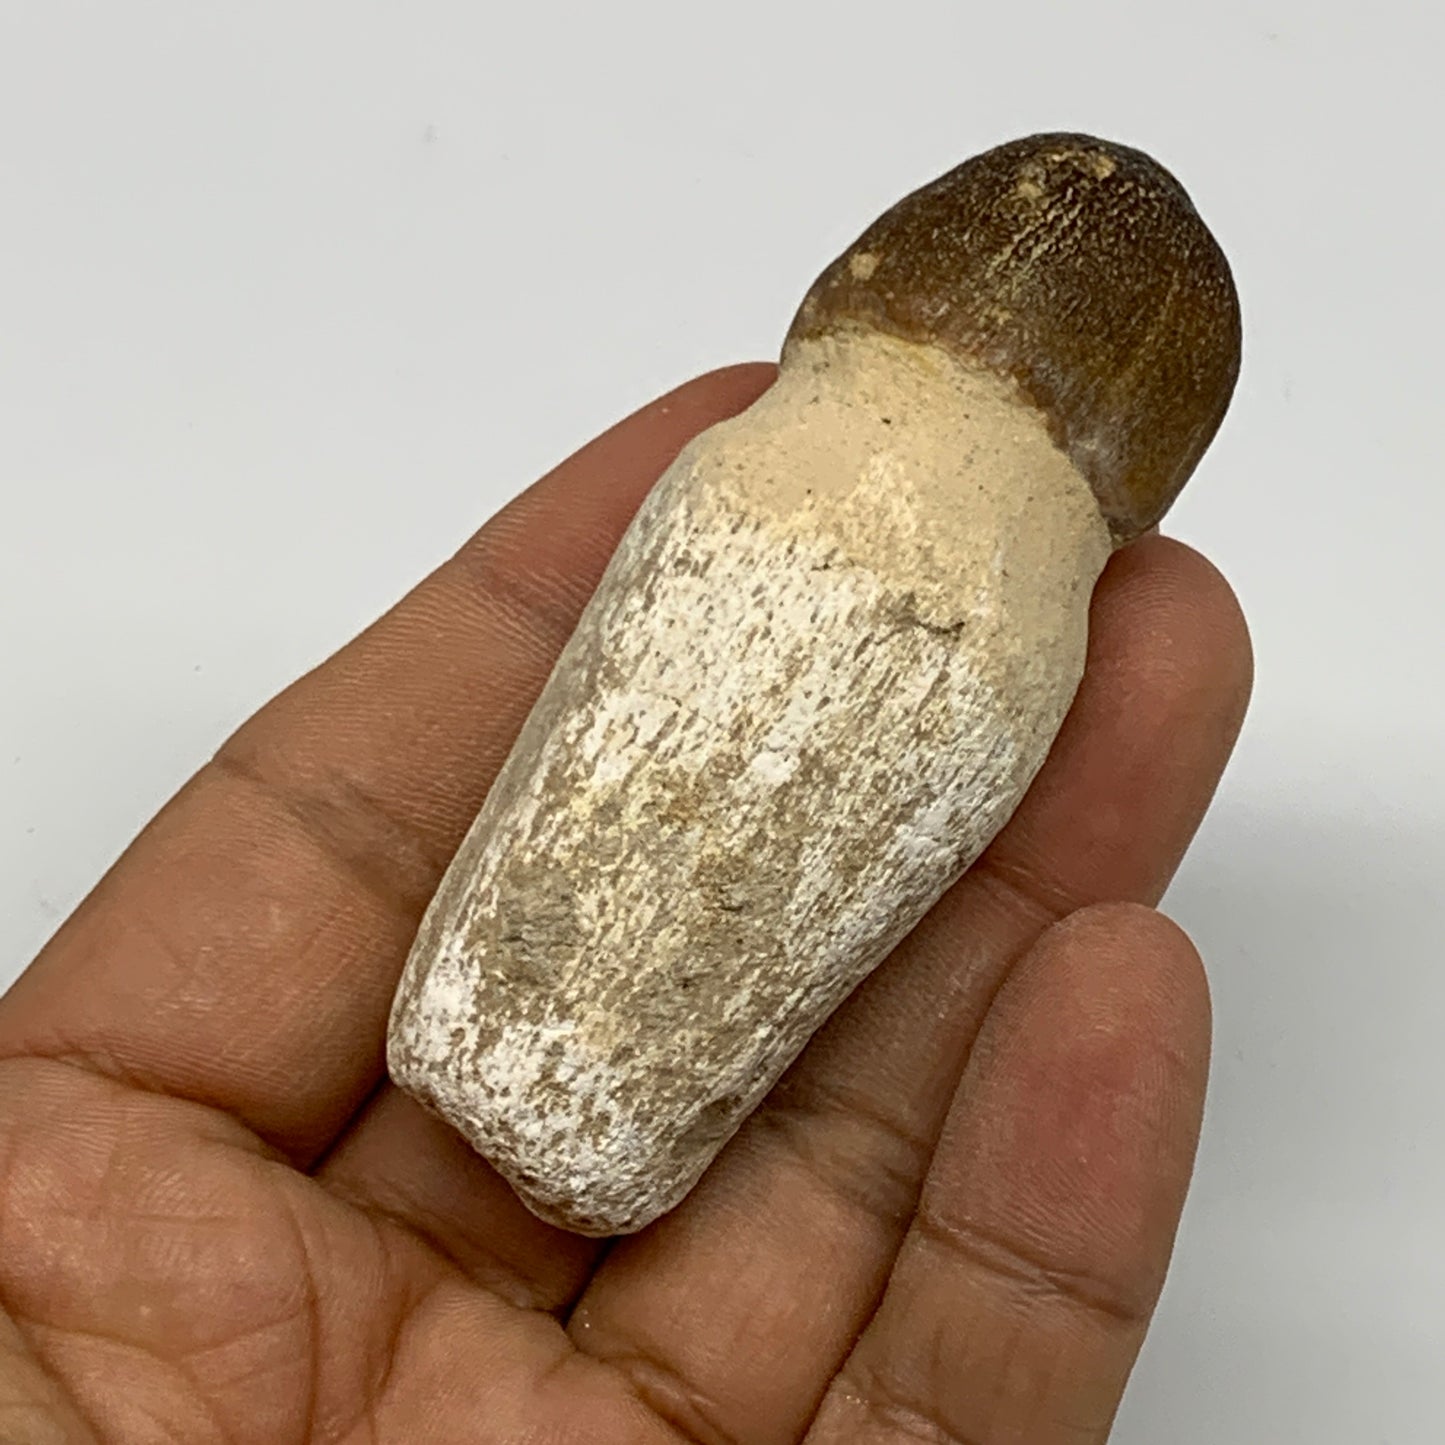 50.5g, 2.8"X1.1"x1" Fossil Globidens phosphaticus (Mosasaur ) Tooth, Cretaceous,